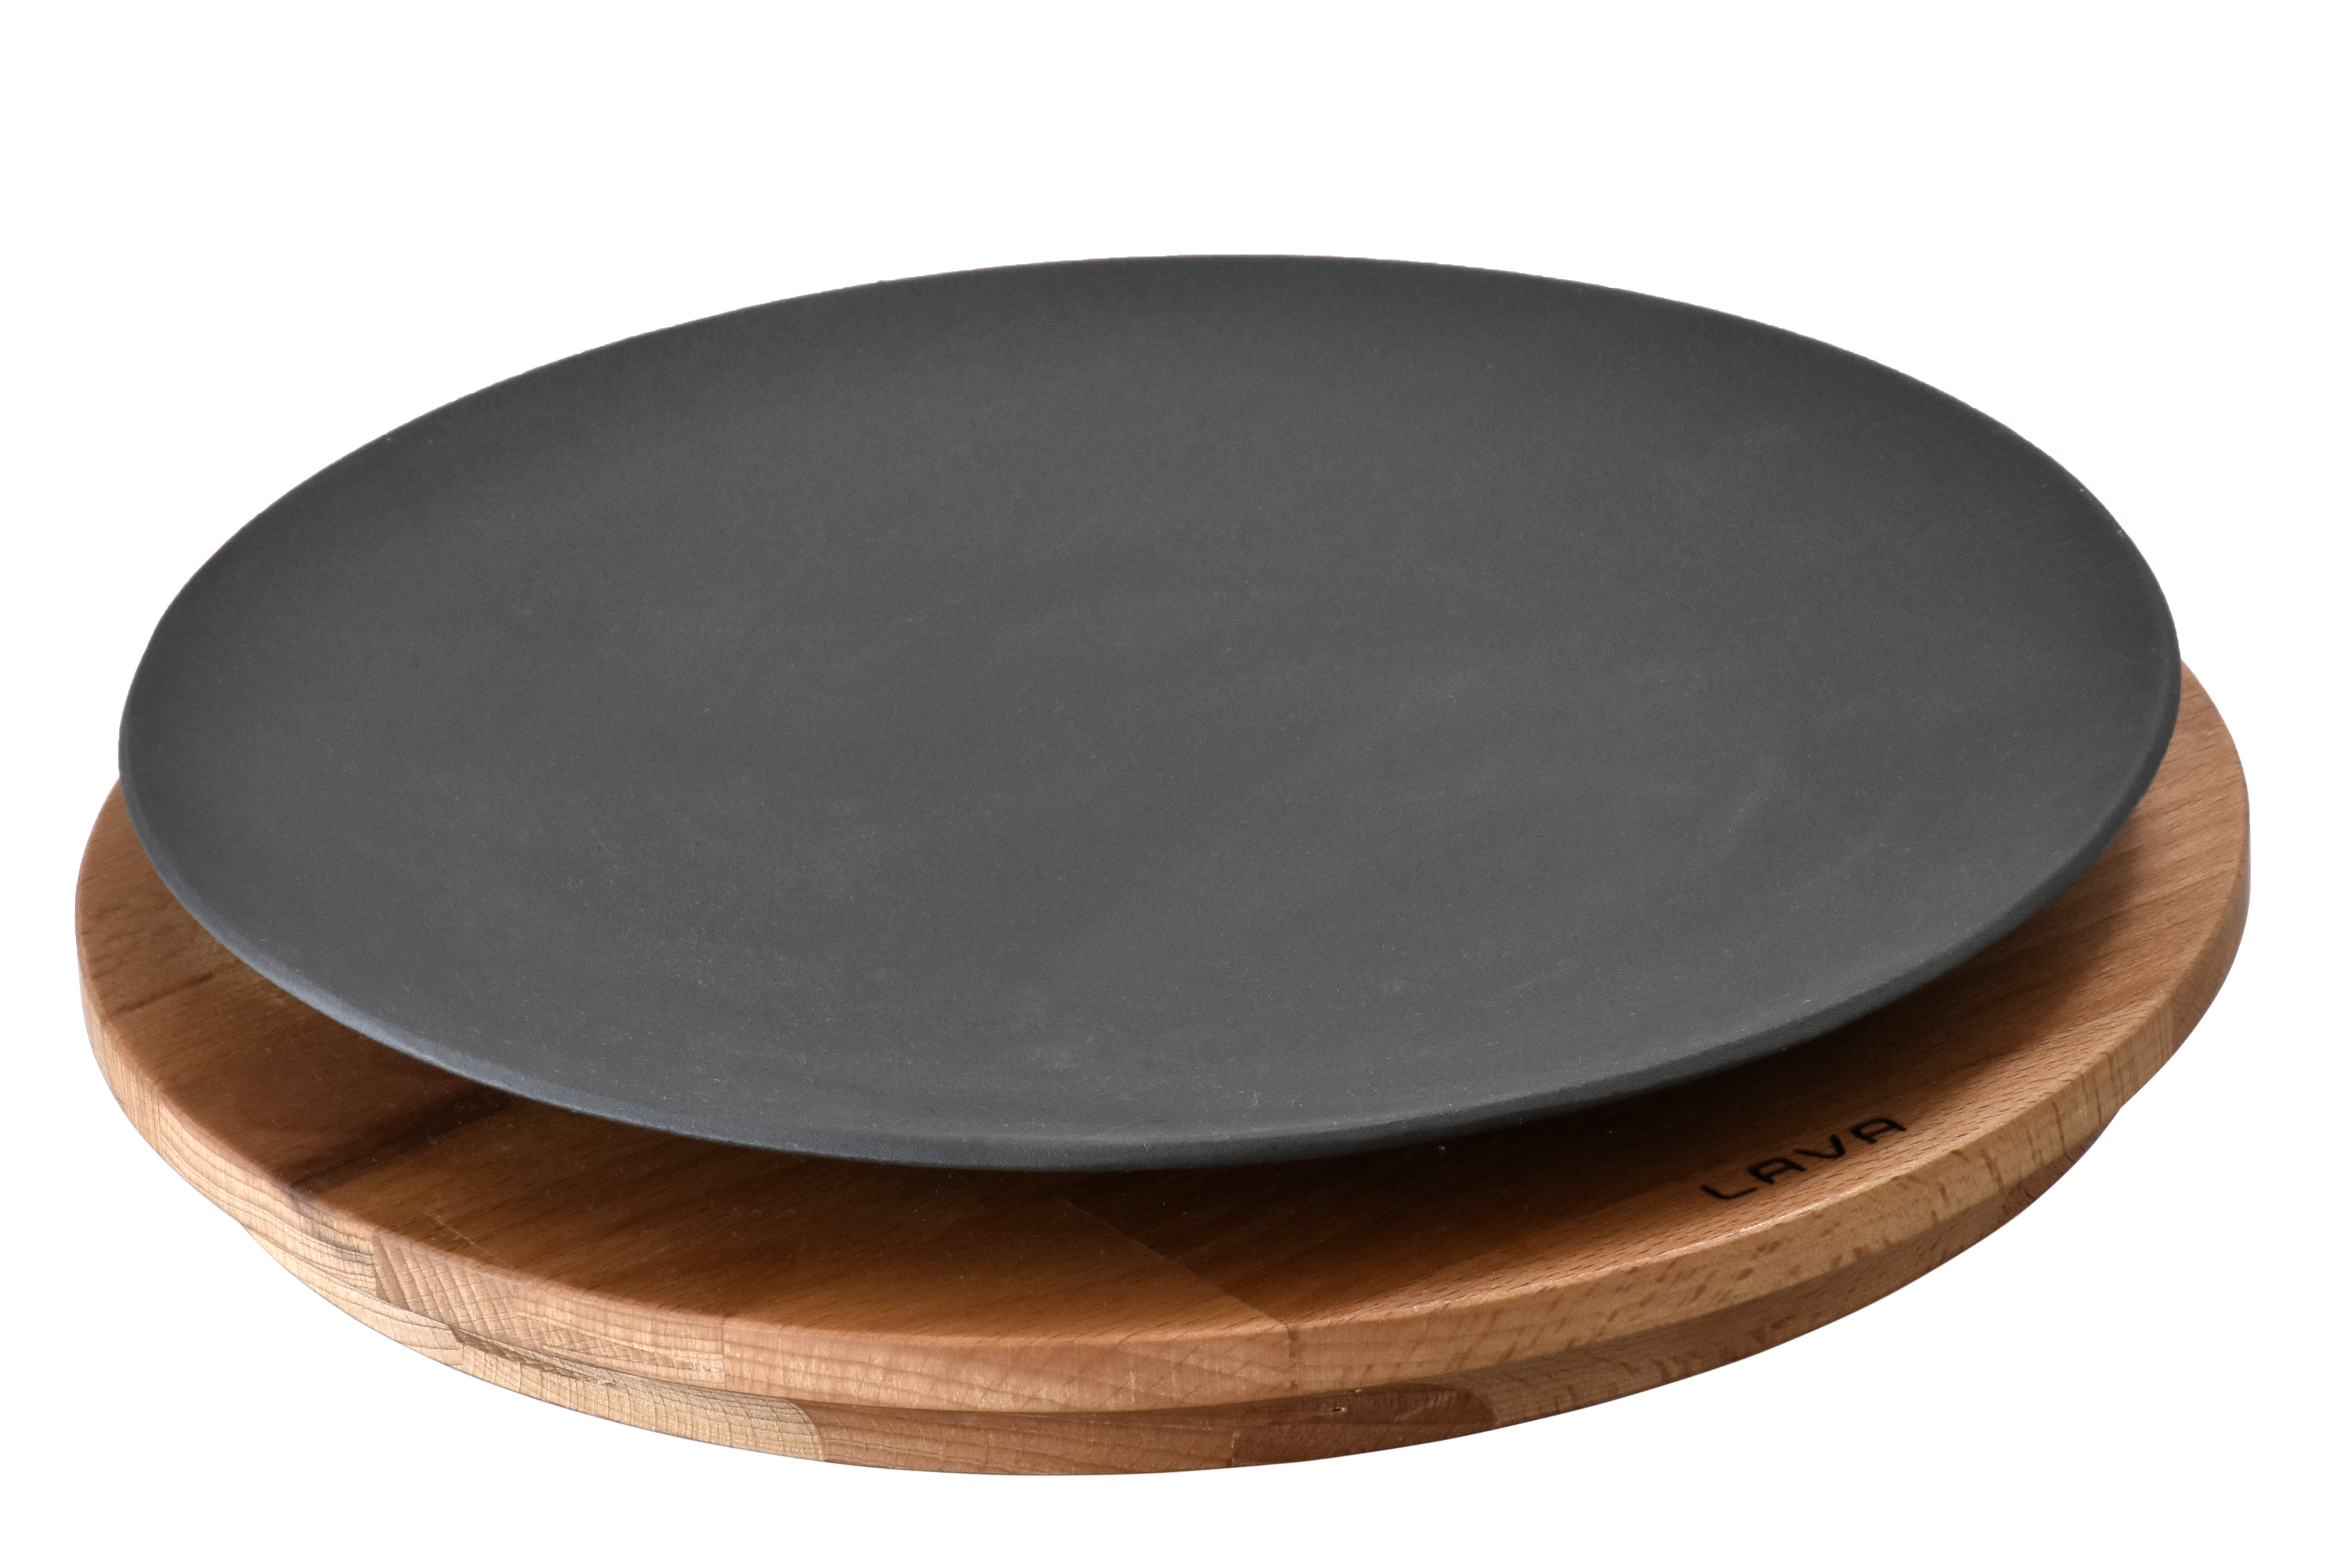 Lava Enameled Cast Iron Serving Dish 8 inch-Round with Beechwood Service Platter, Size: W:10,07 Large:13,62 H:1,96, Black